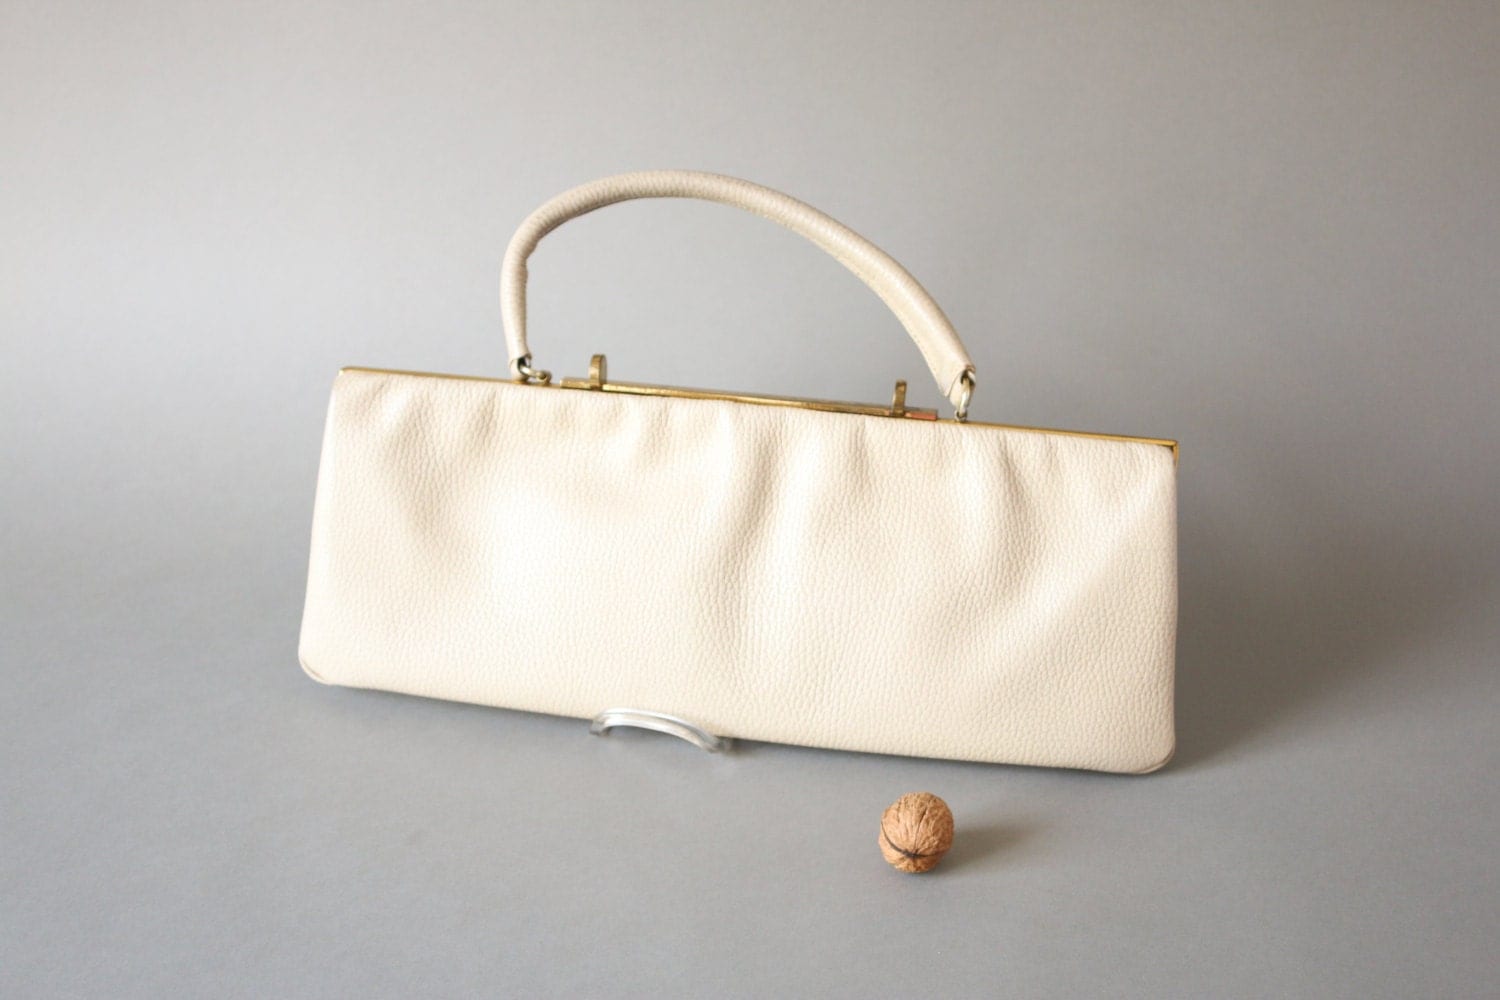 Vintage white off-white or cream leather clutch hand bag 50s